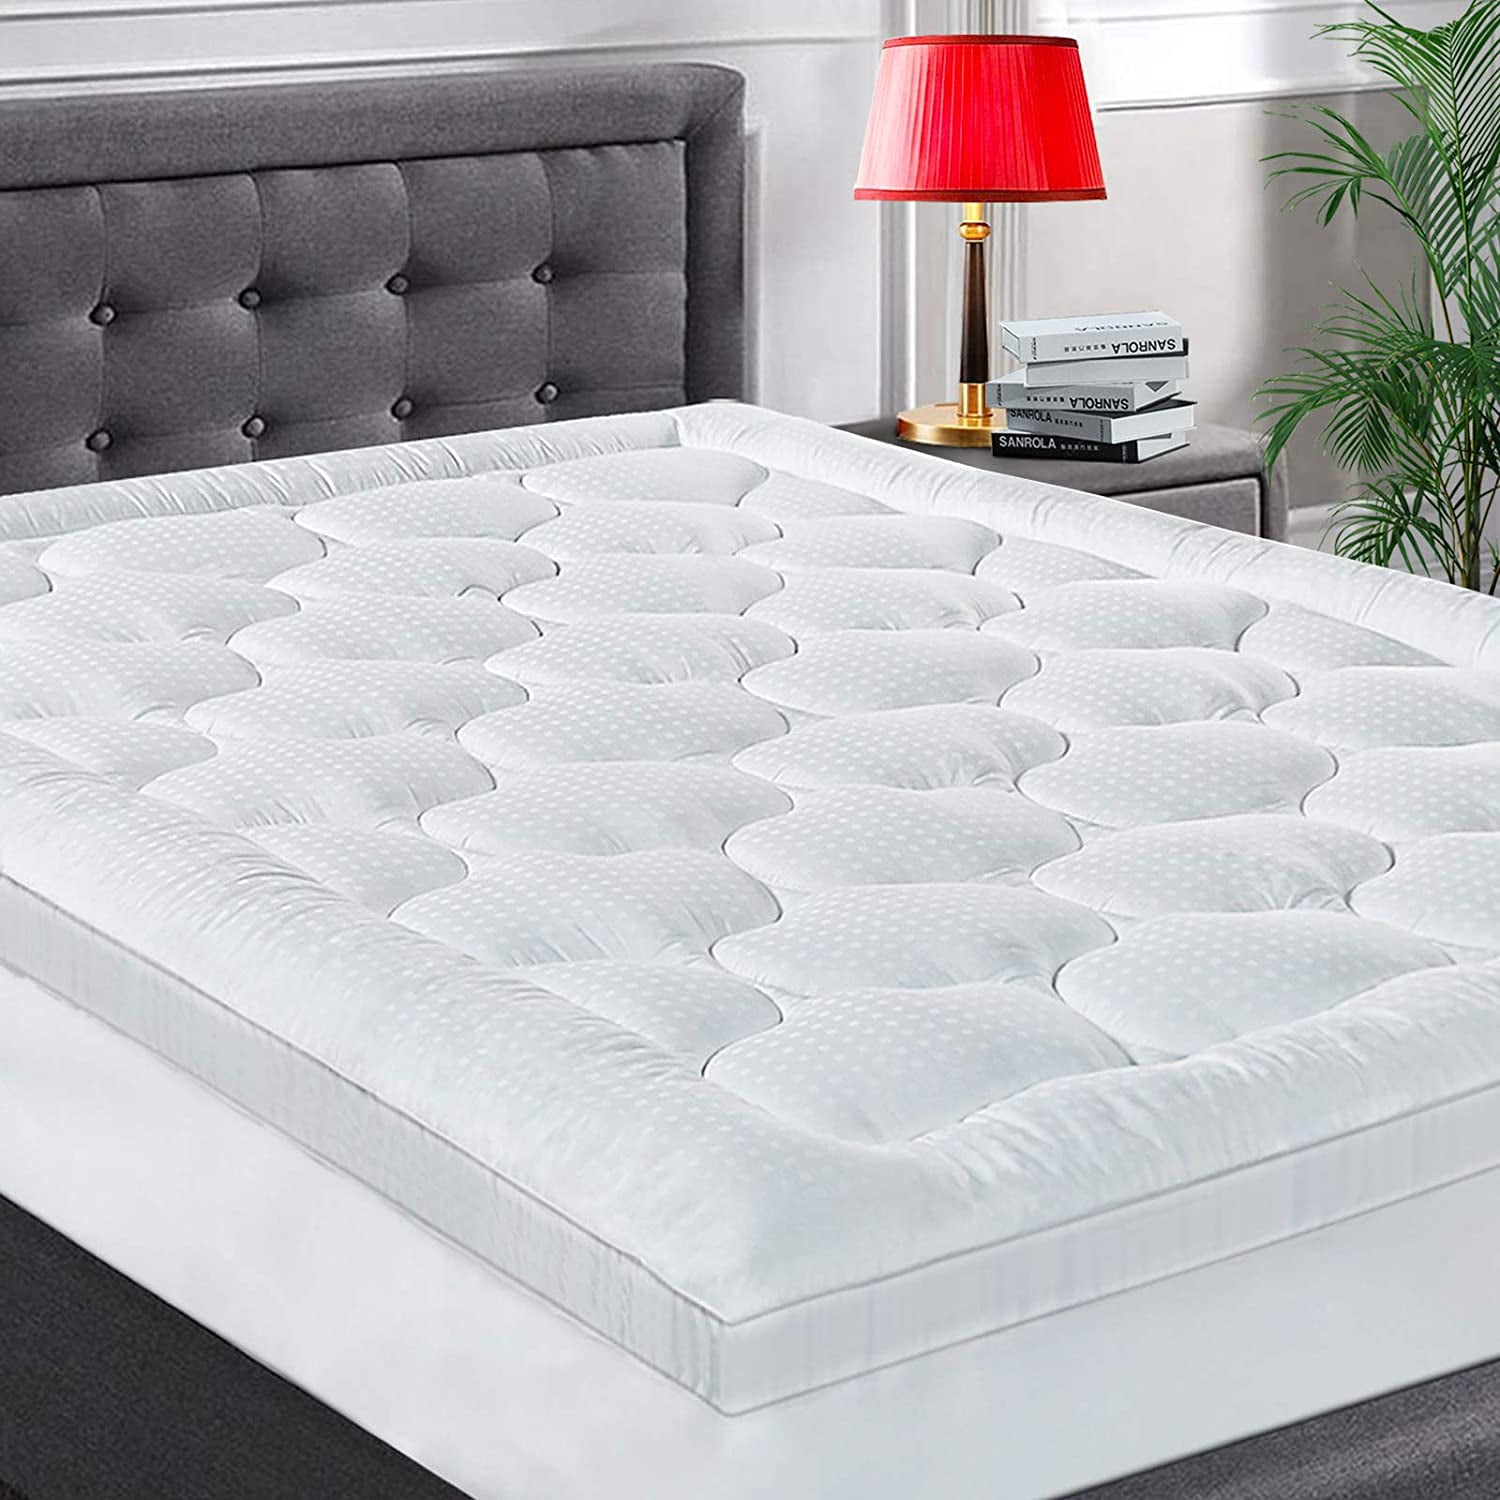 COHOME Queen Size Mattress Topper Extra Thick Cooling Mattress Pad